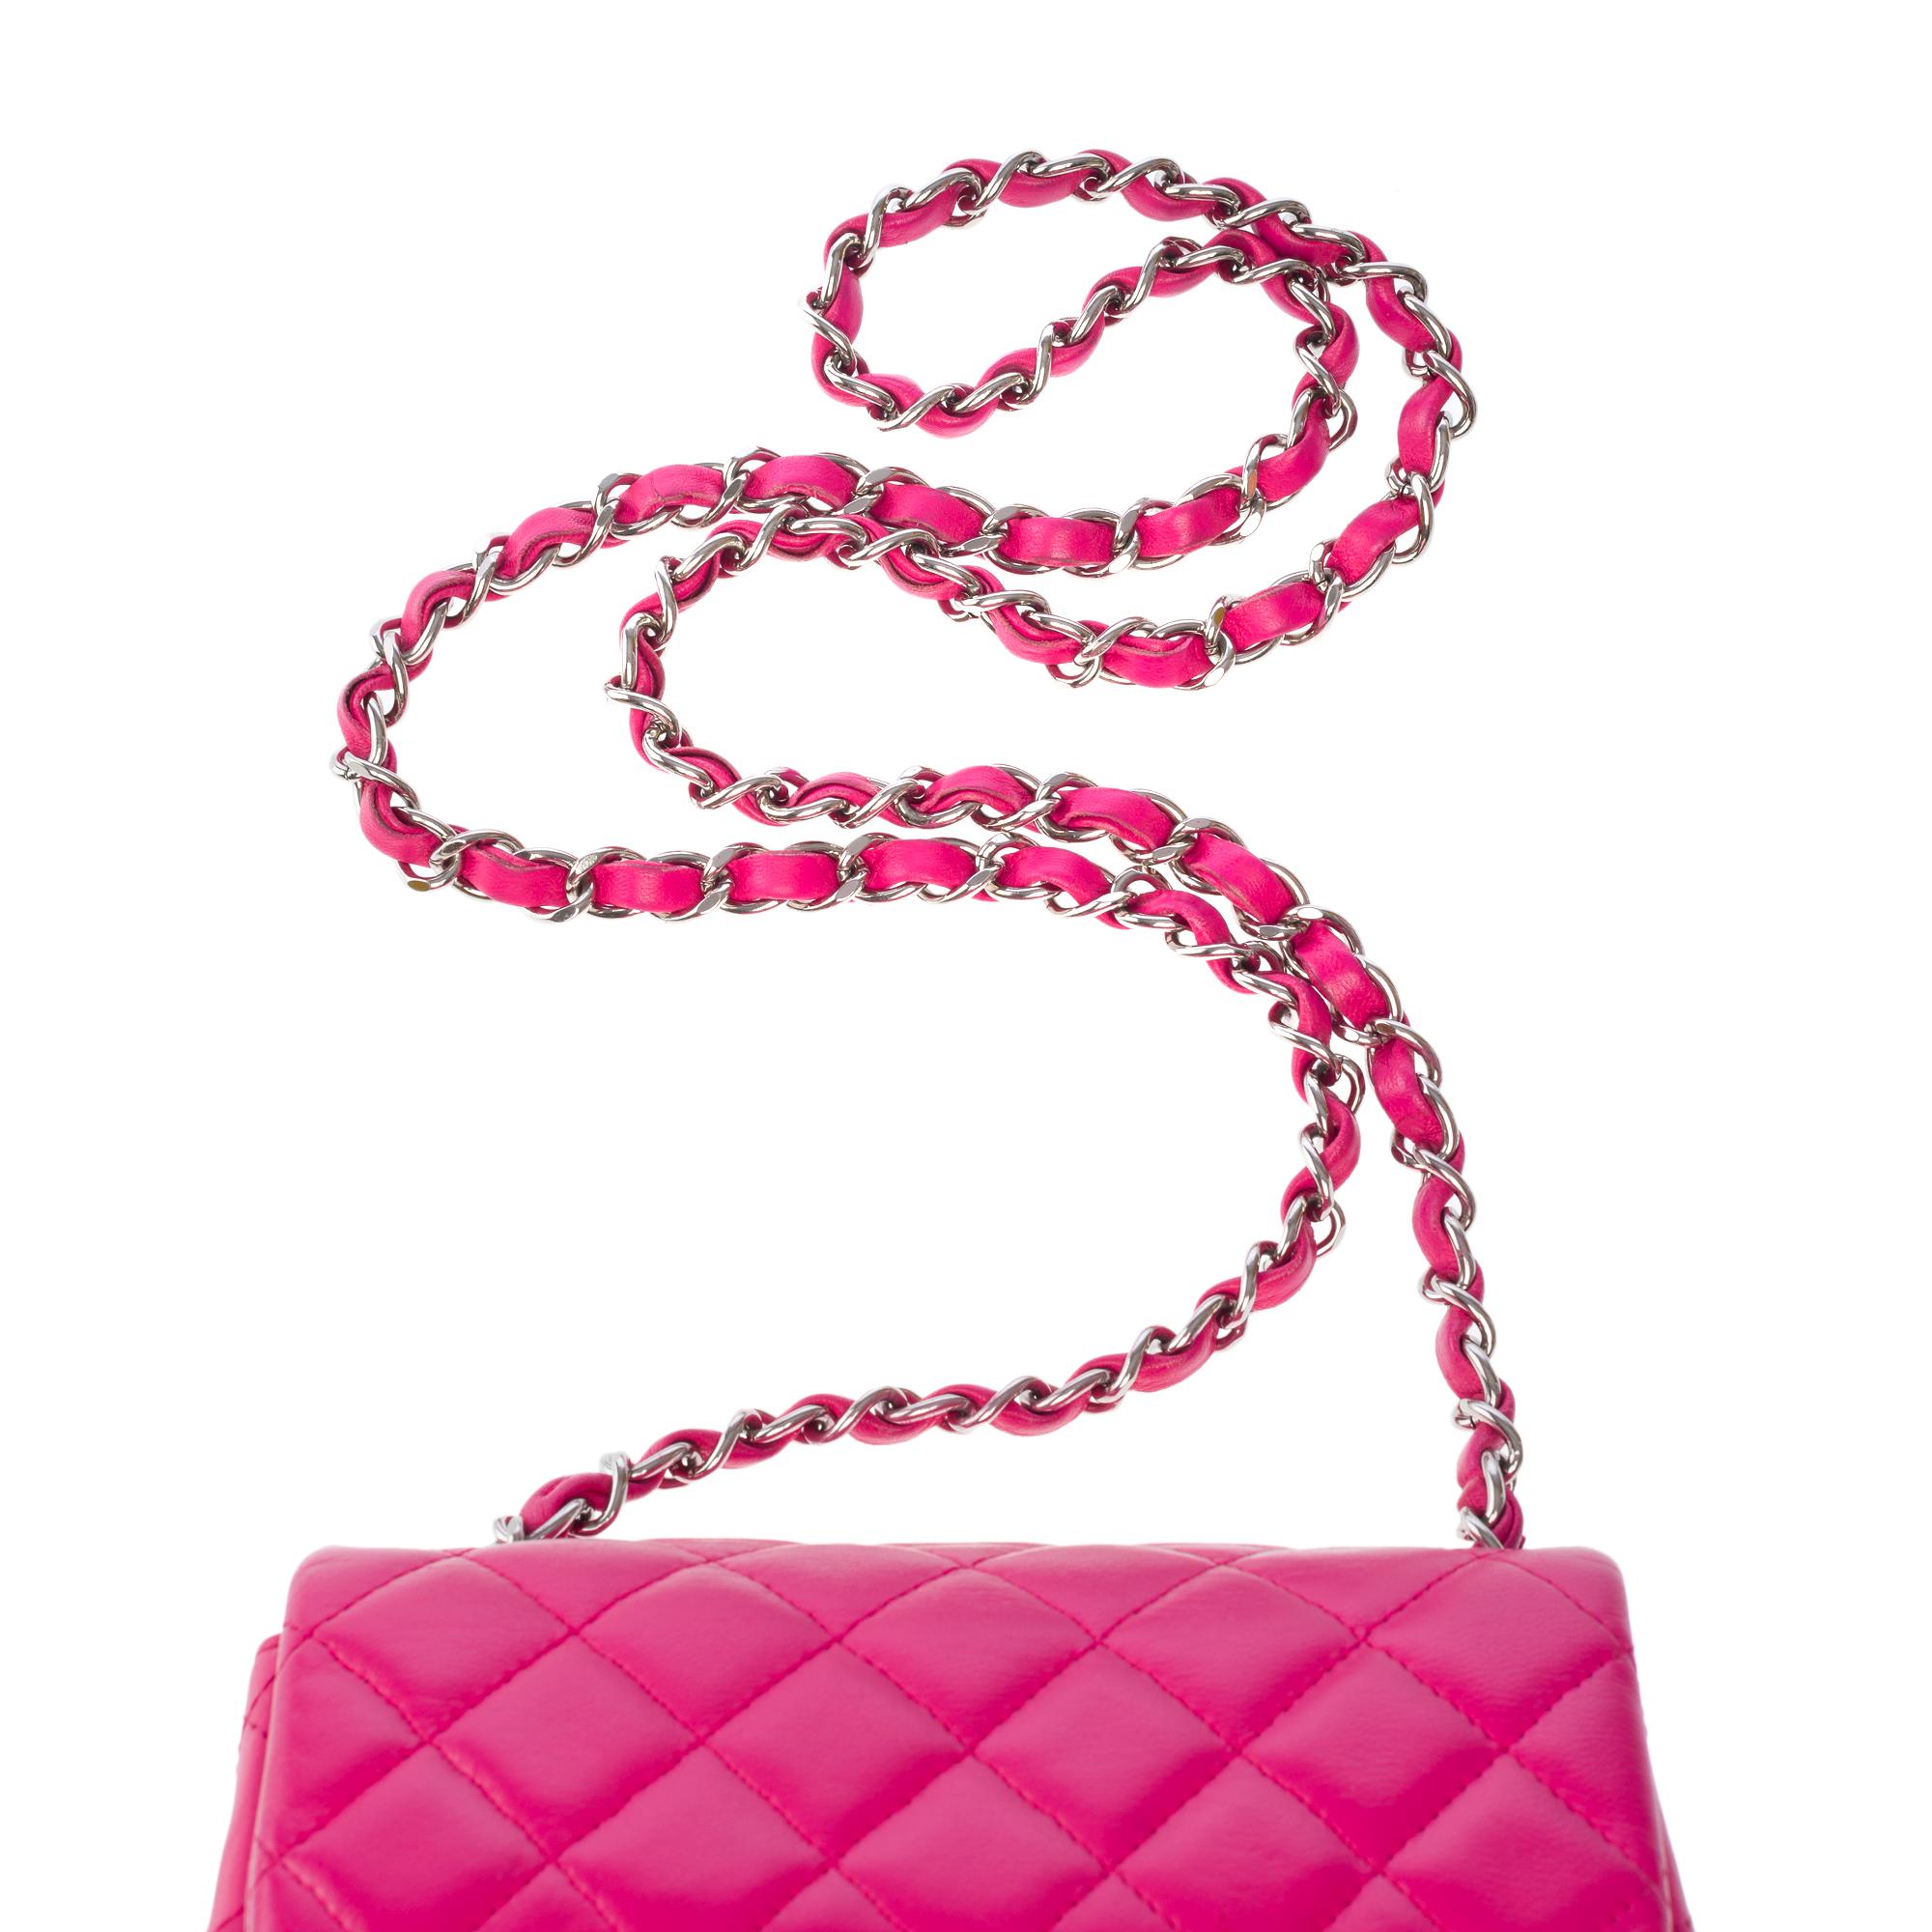 Gorgeous Chanel Mini Timeless Shoulder flap bag in Pink quilted leather, SHW 5